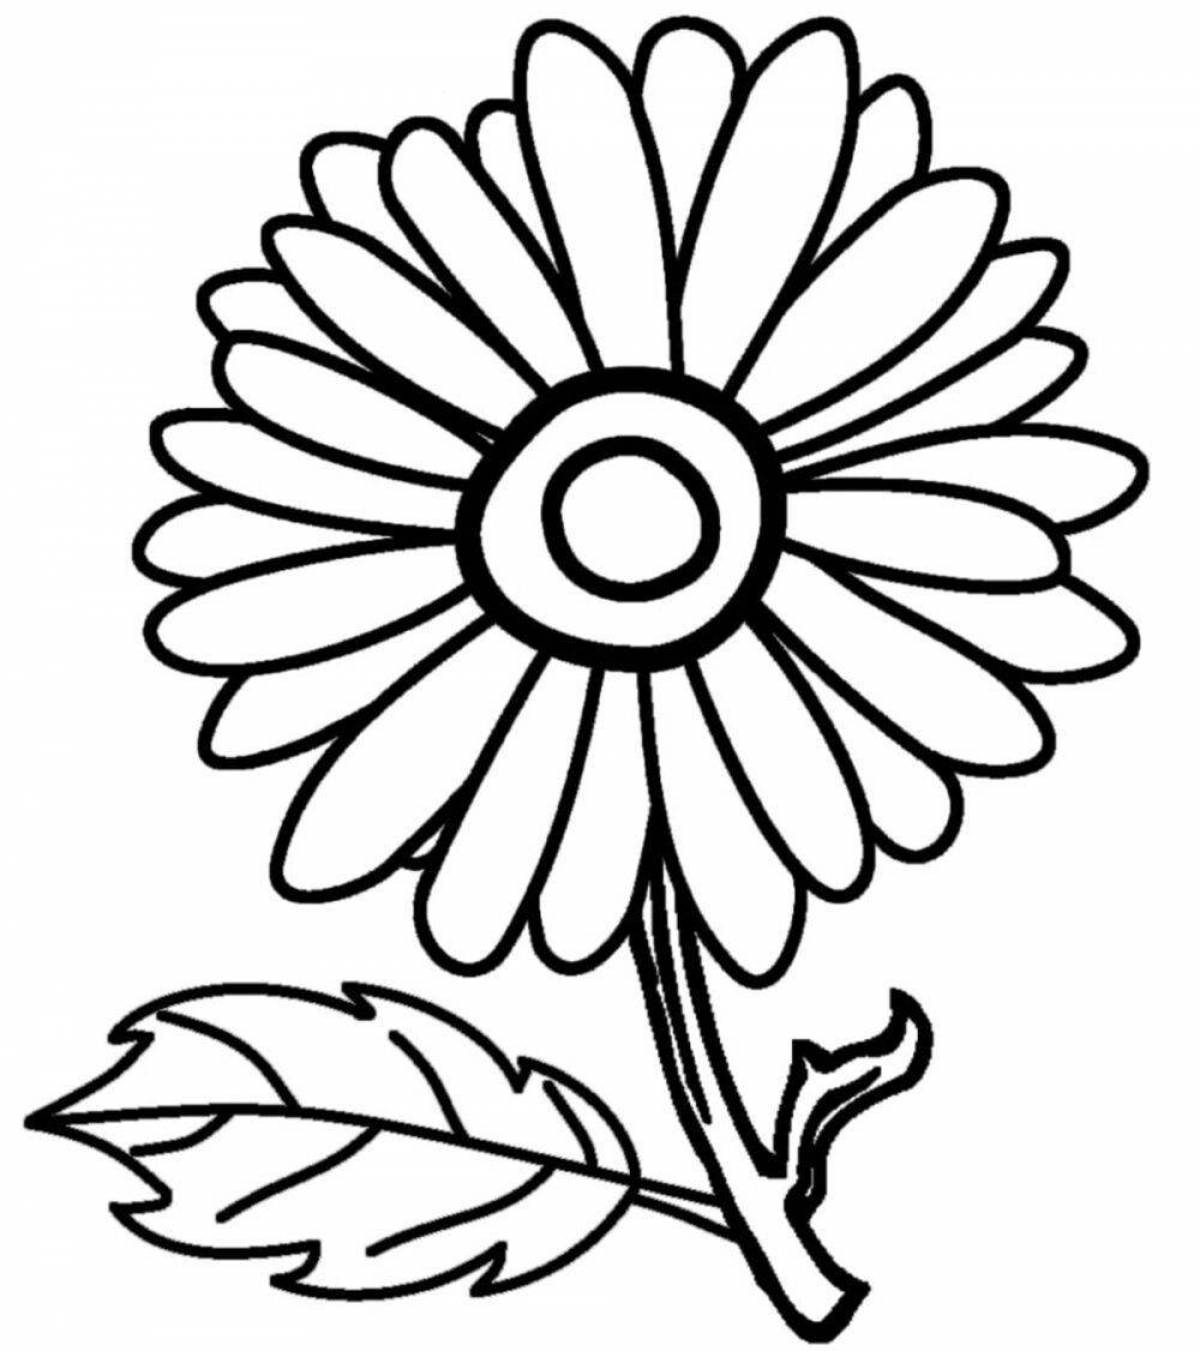 Fabulous daisy flower coloring pages for kids